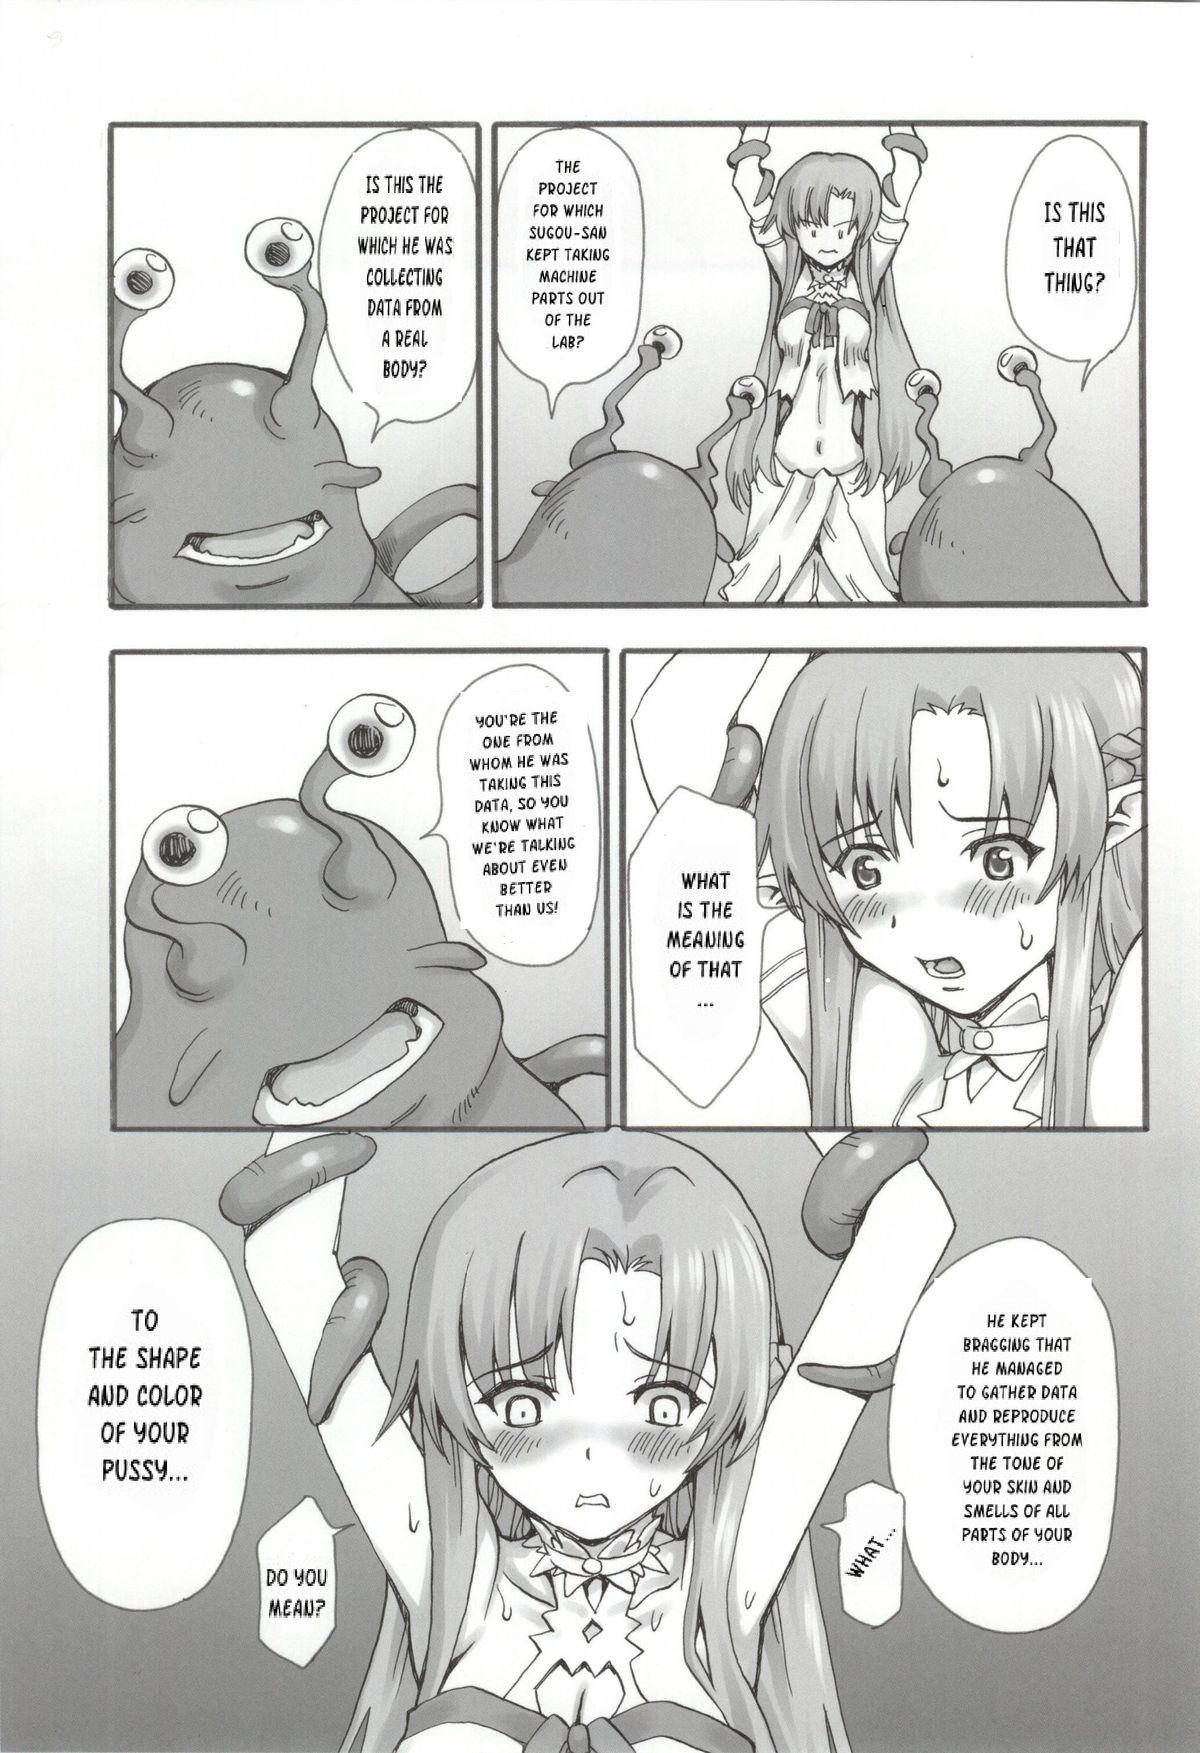 Gay Interracial Datte Kasou Sekai dashi. | After All, It's Just A Virtual World. - Sword art online Scandal - Page 6